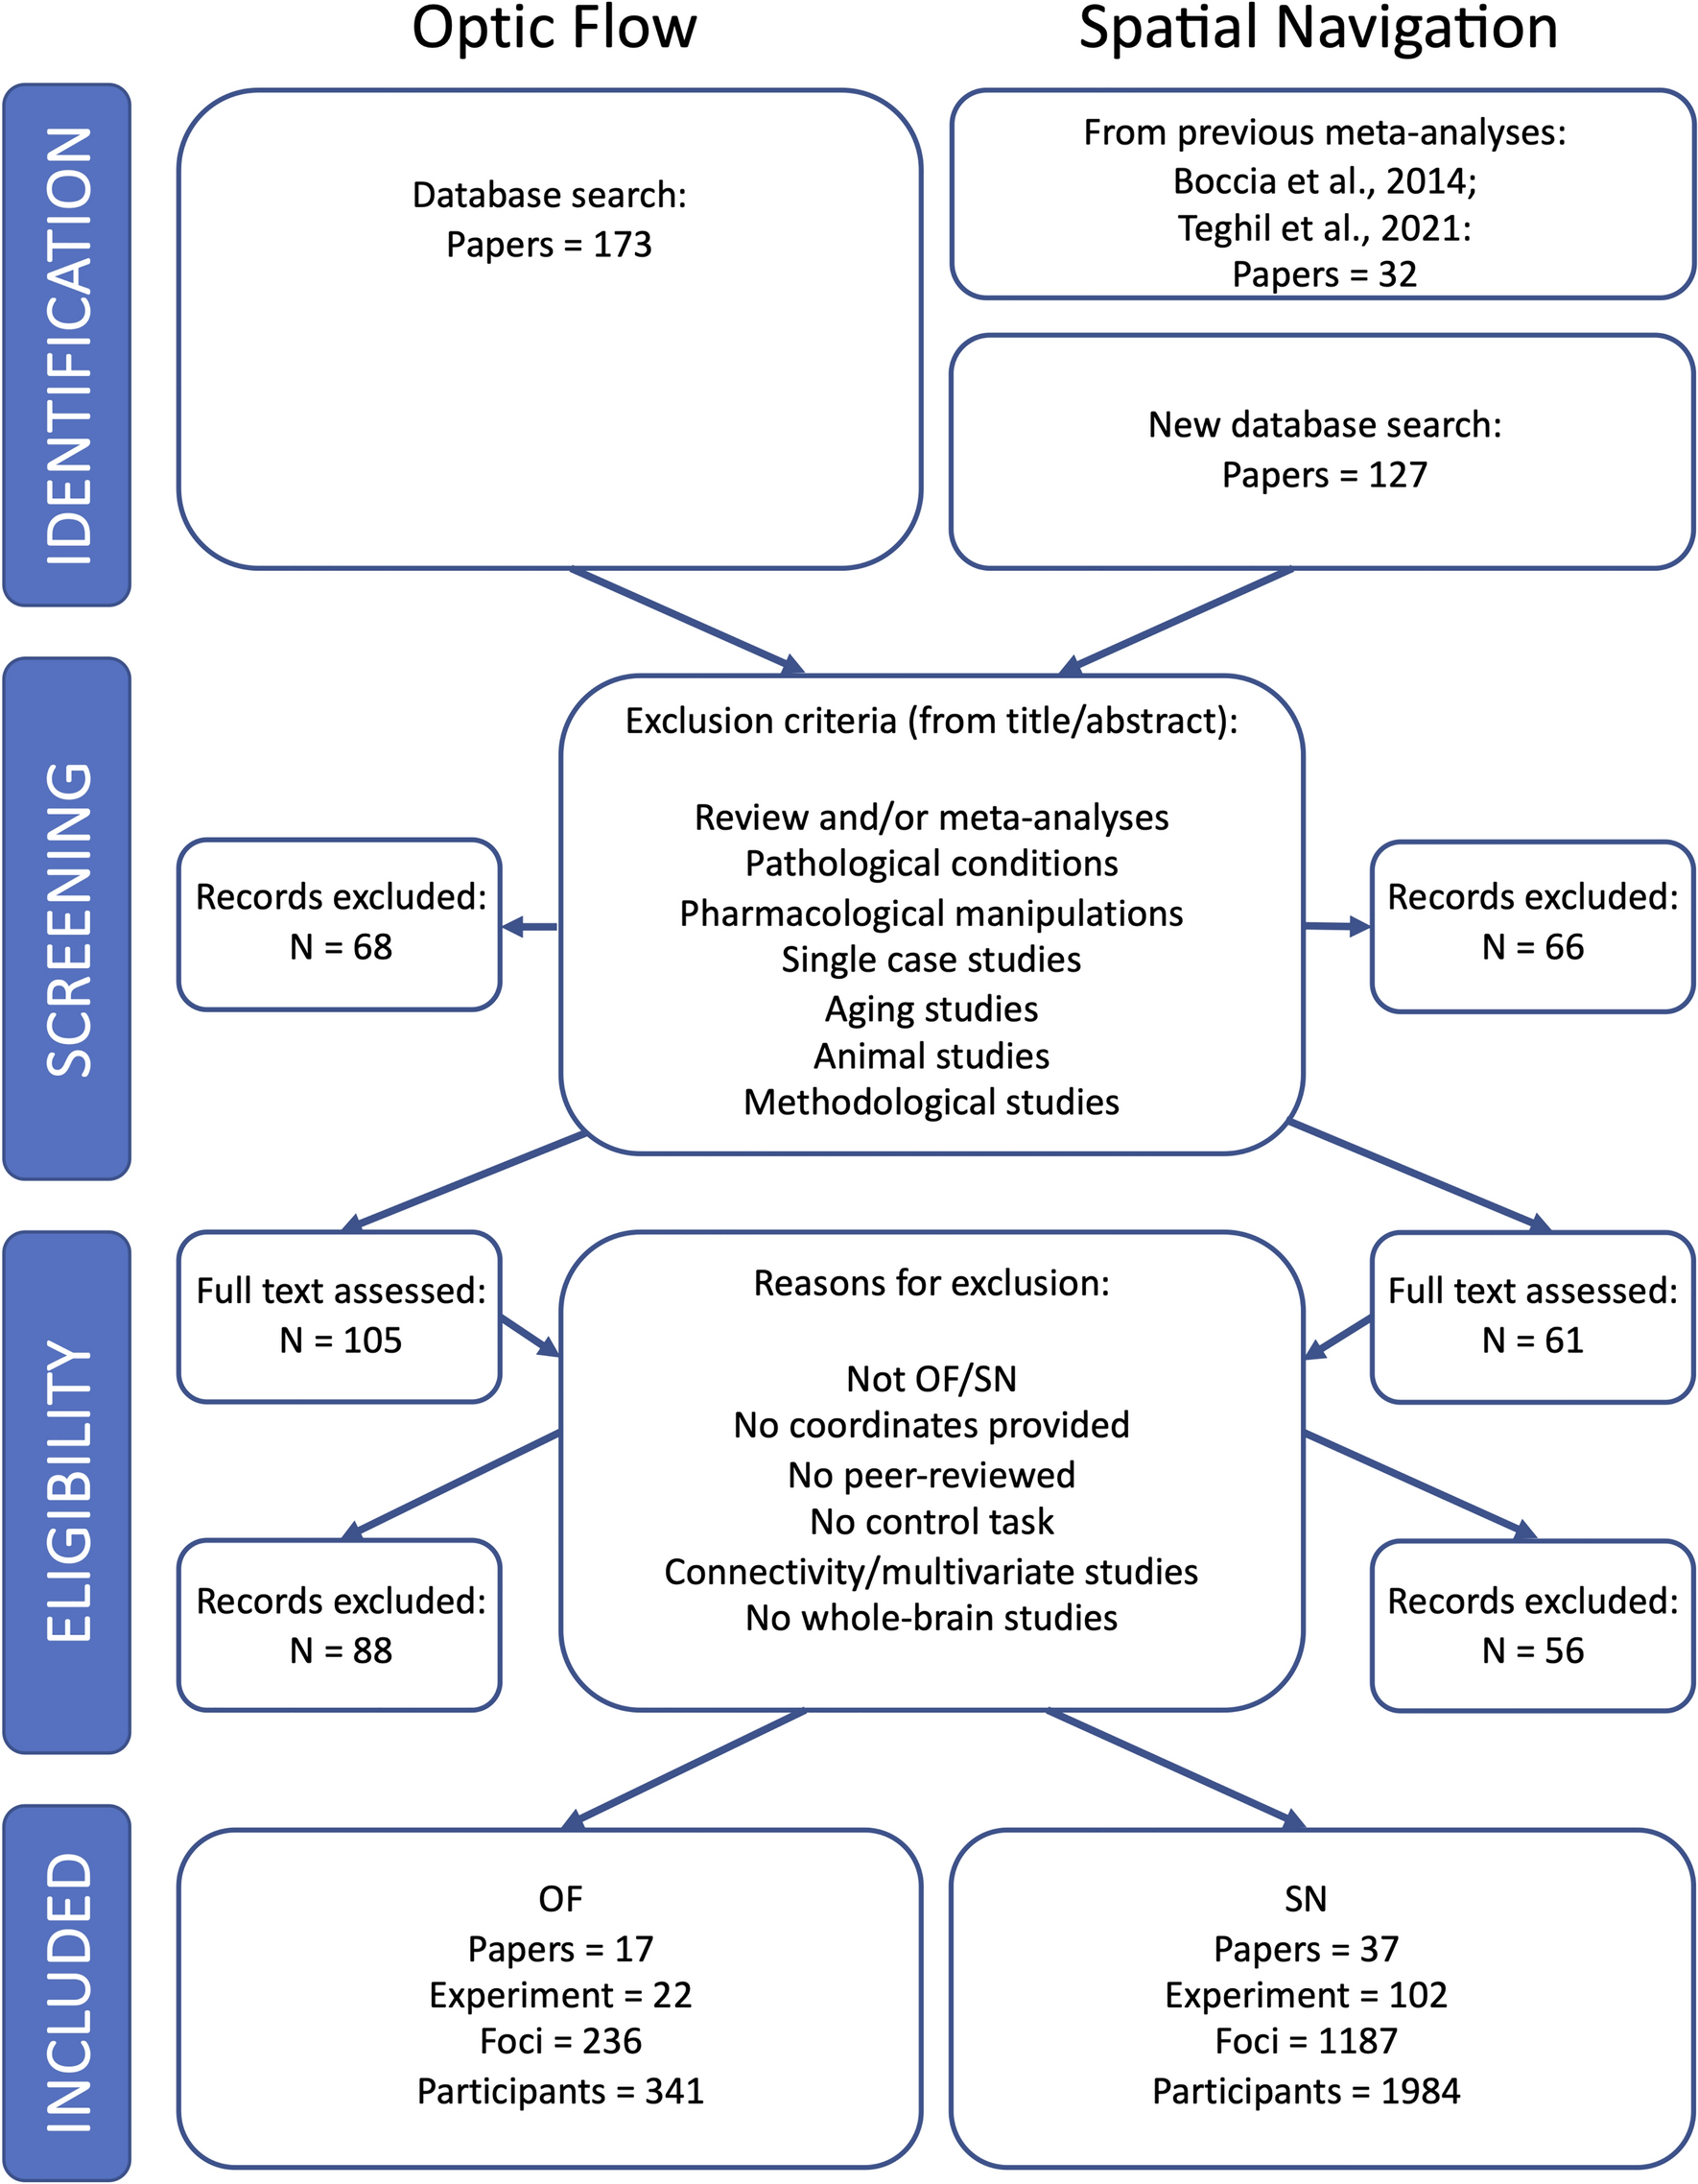 Common and specific activations supporting optic flow processing and navigation as revealed by a meta-analysis of neuroimaging studies